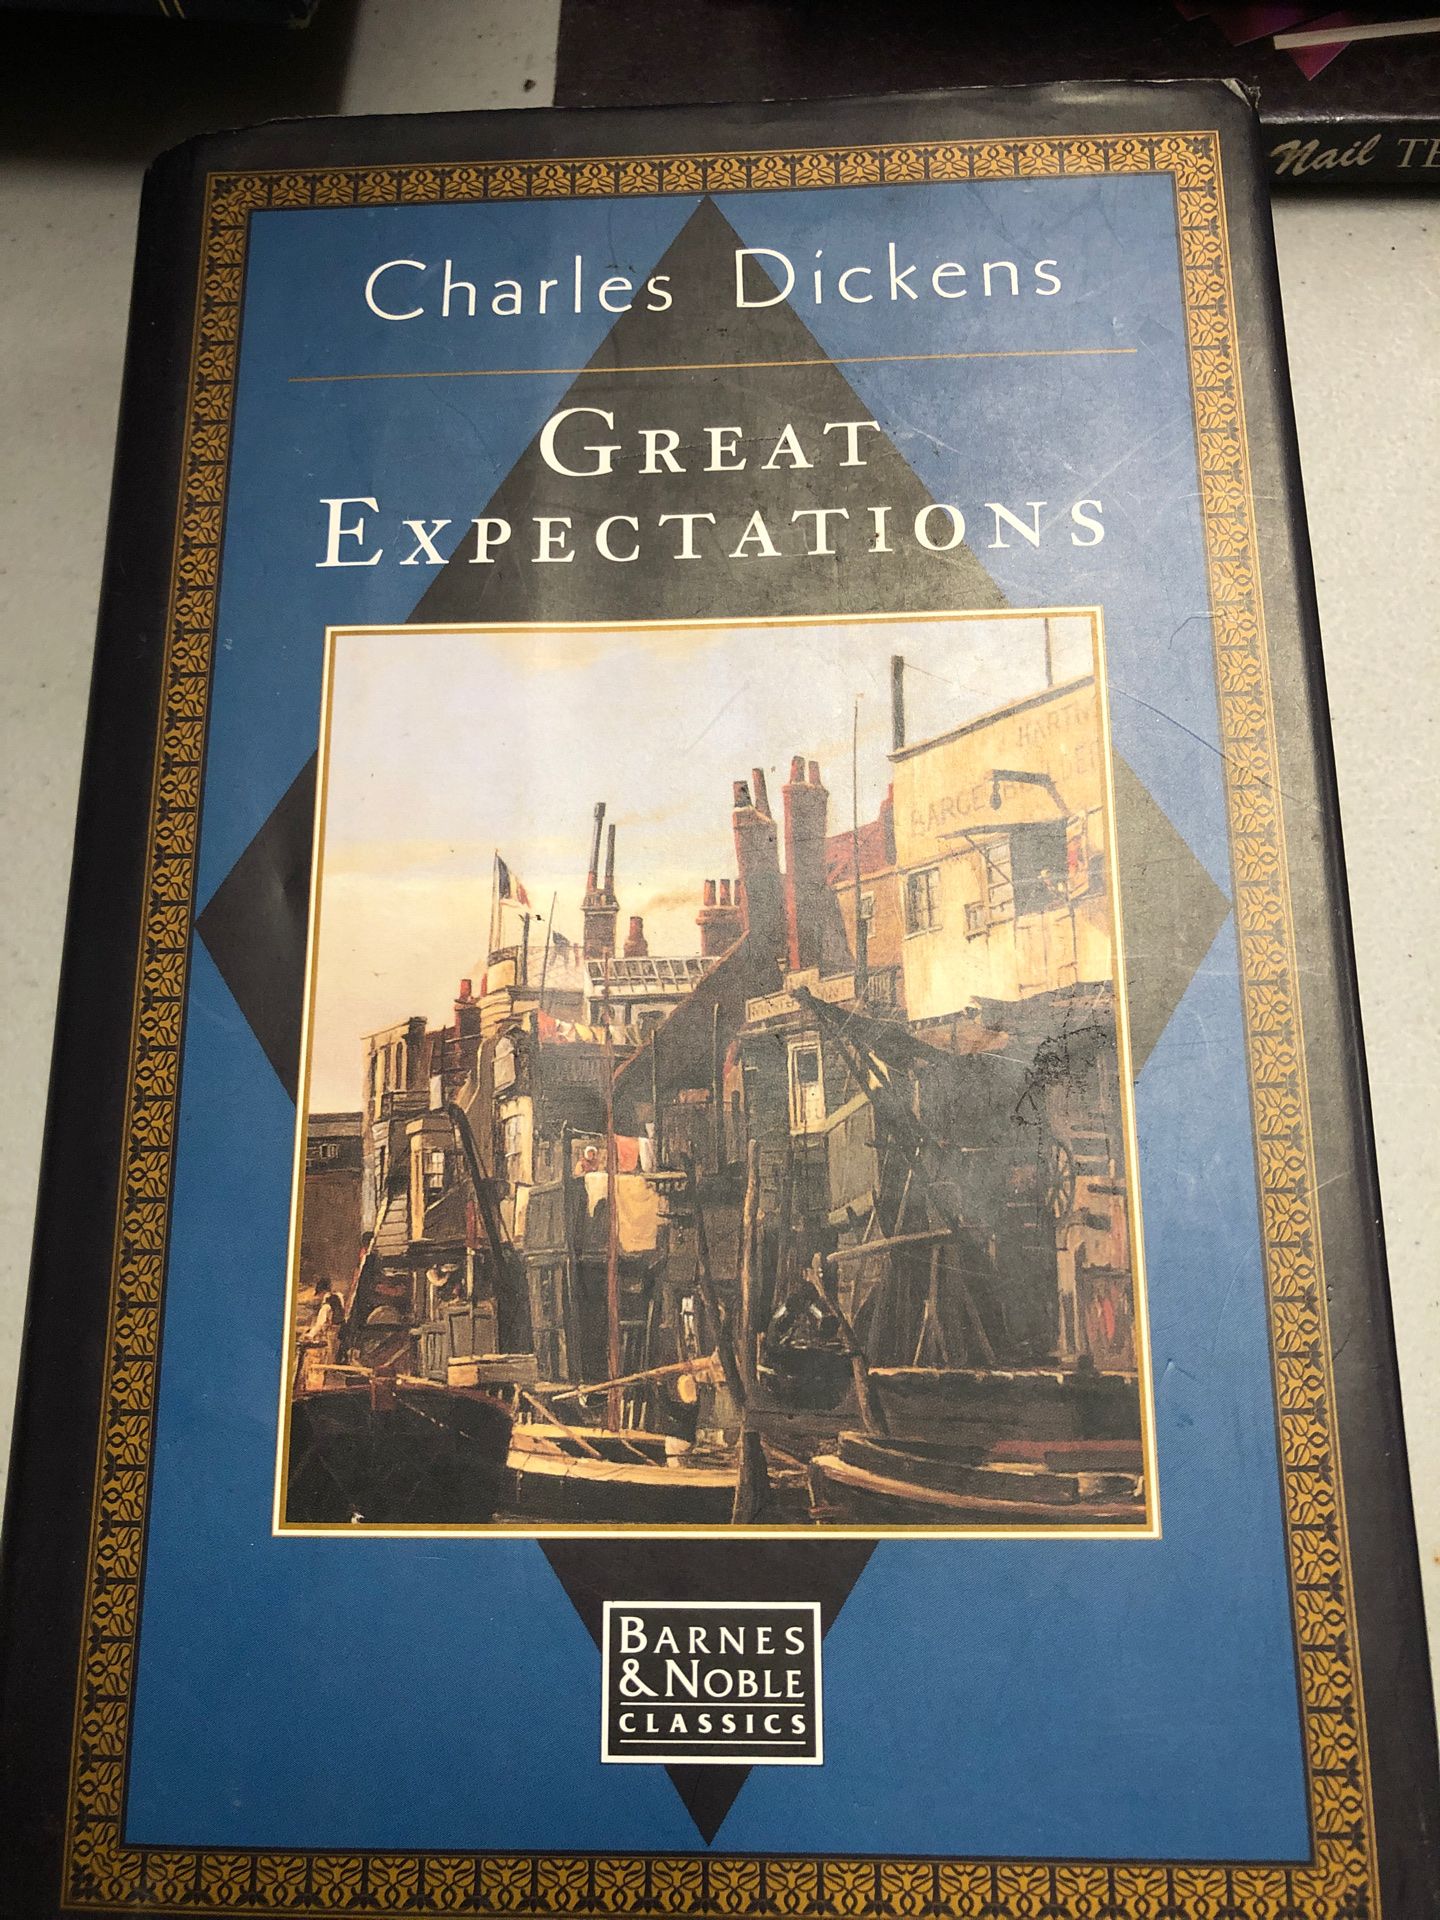 Great expectations by Charles dickens